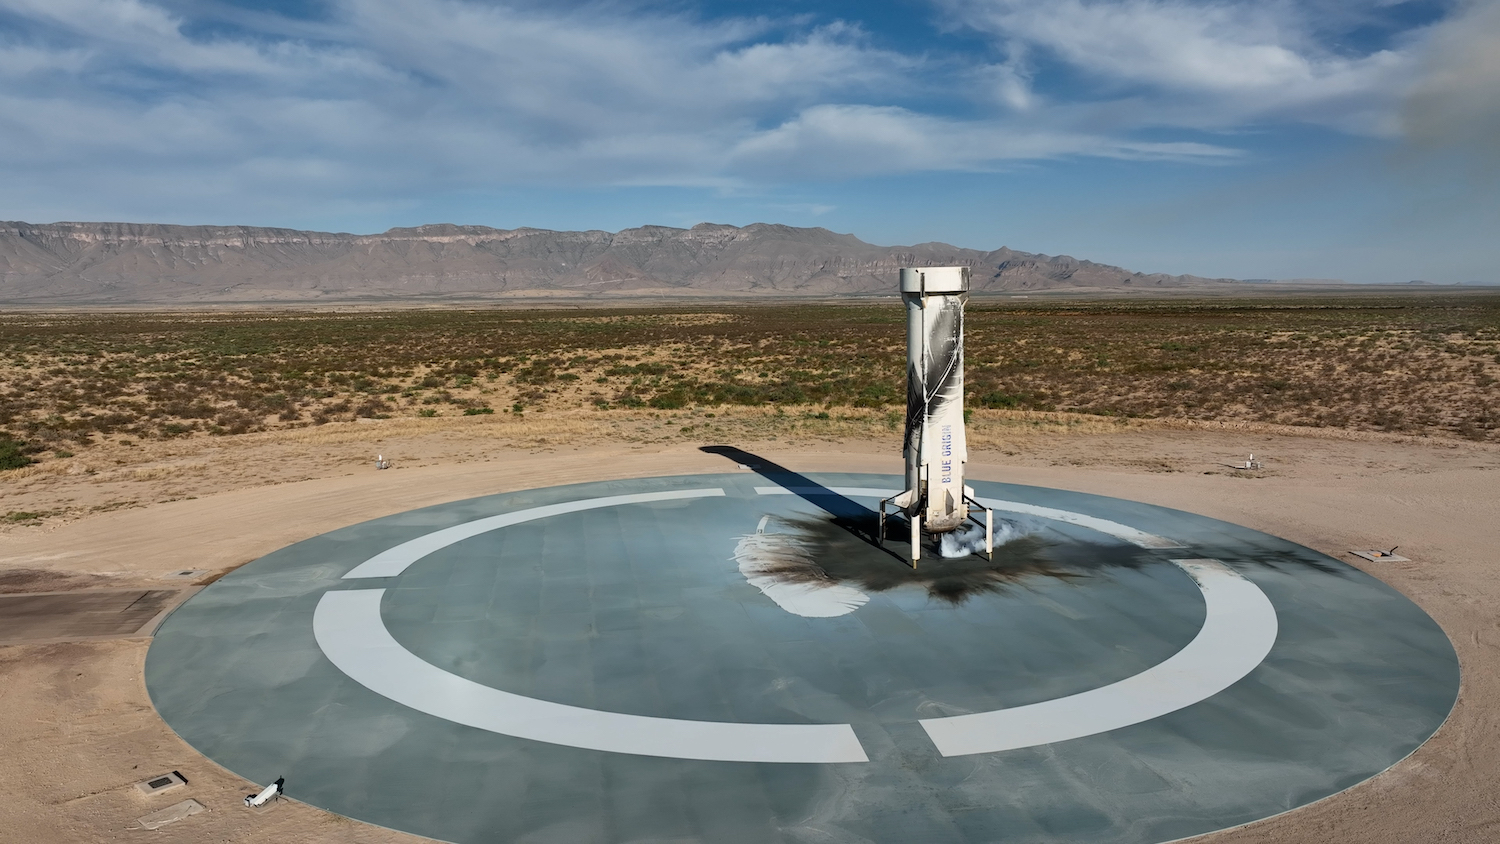 The booster is vertical on the landing pad. The area on the pad immediately around the booster is scorched by the engine's flames, and the desert and mountains can be seen in the background.